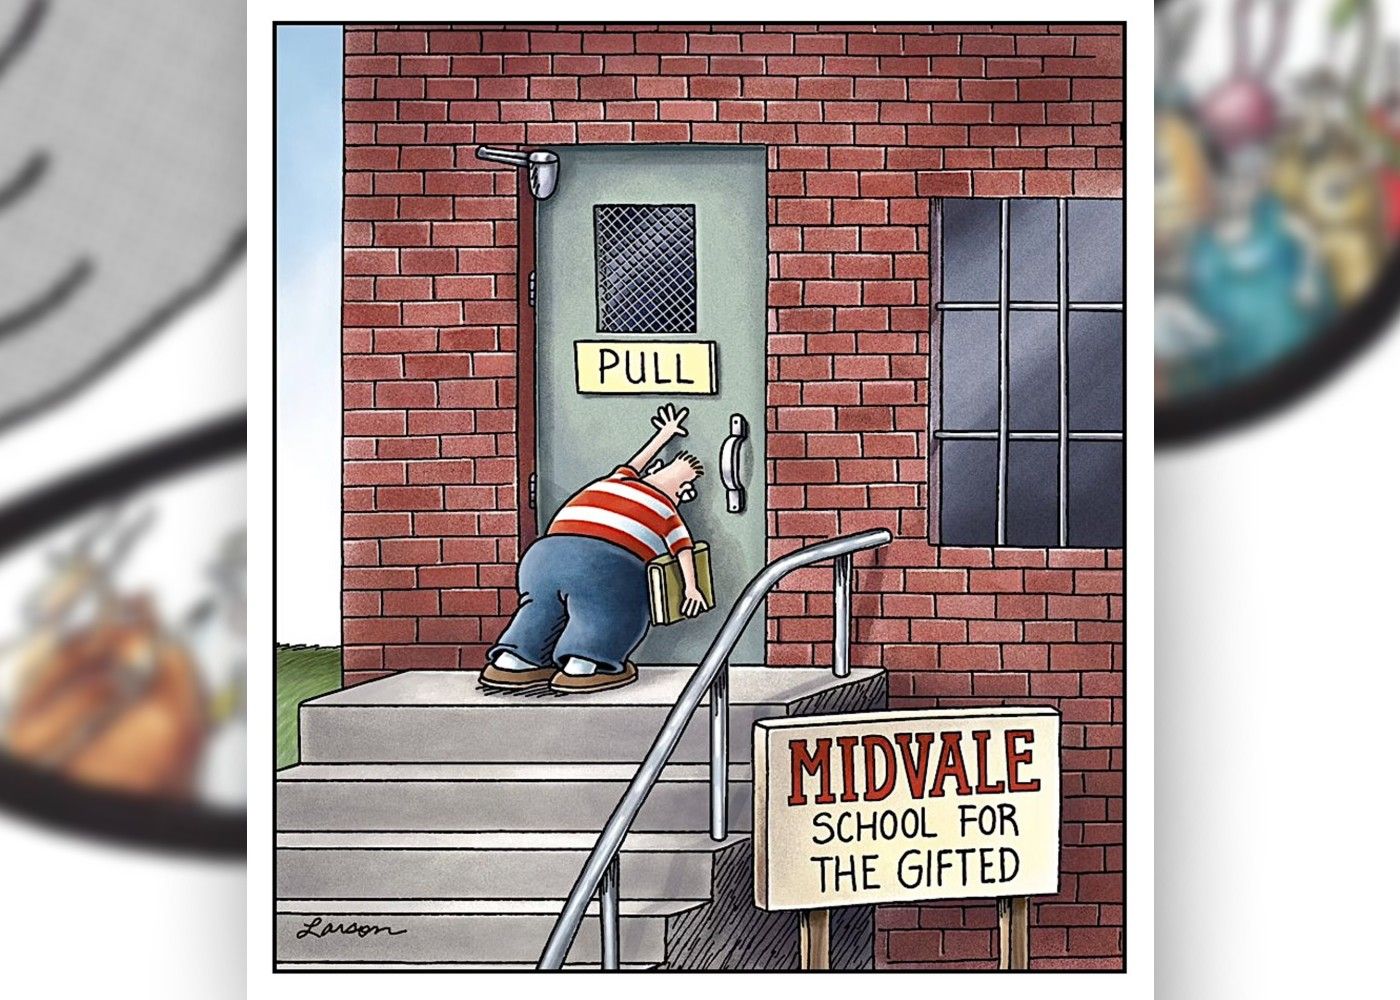 far side comic where a gifted kid is pushing a pull door